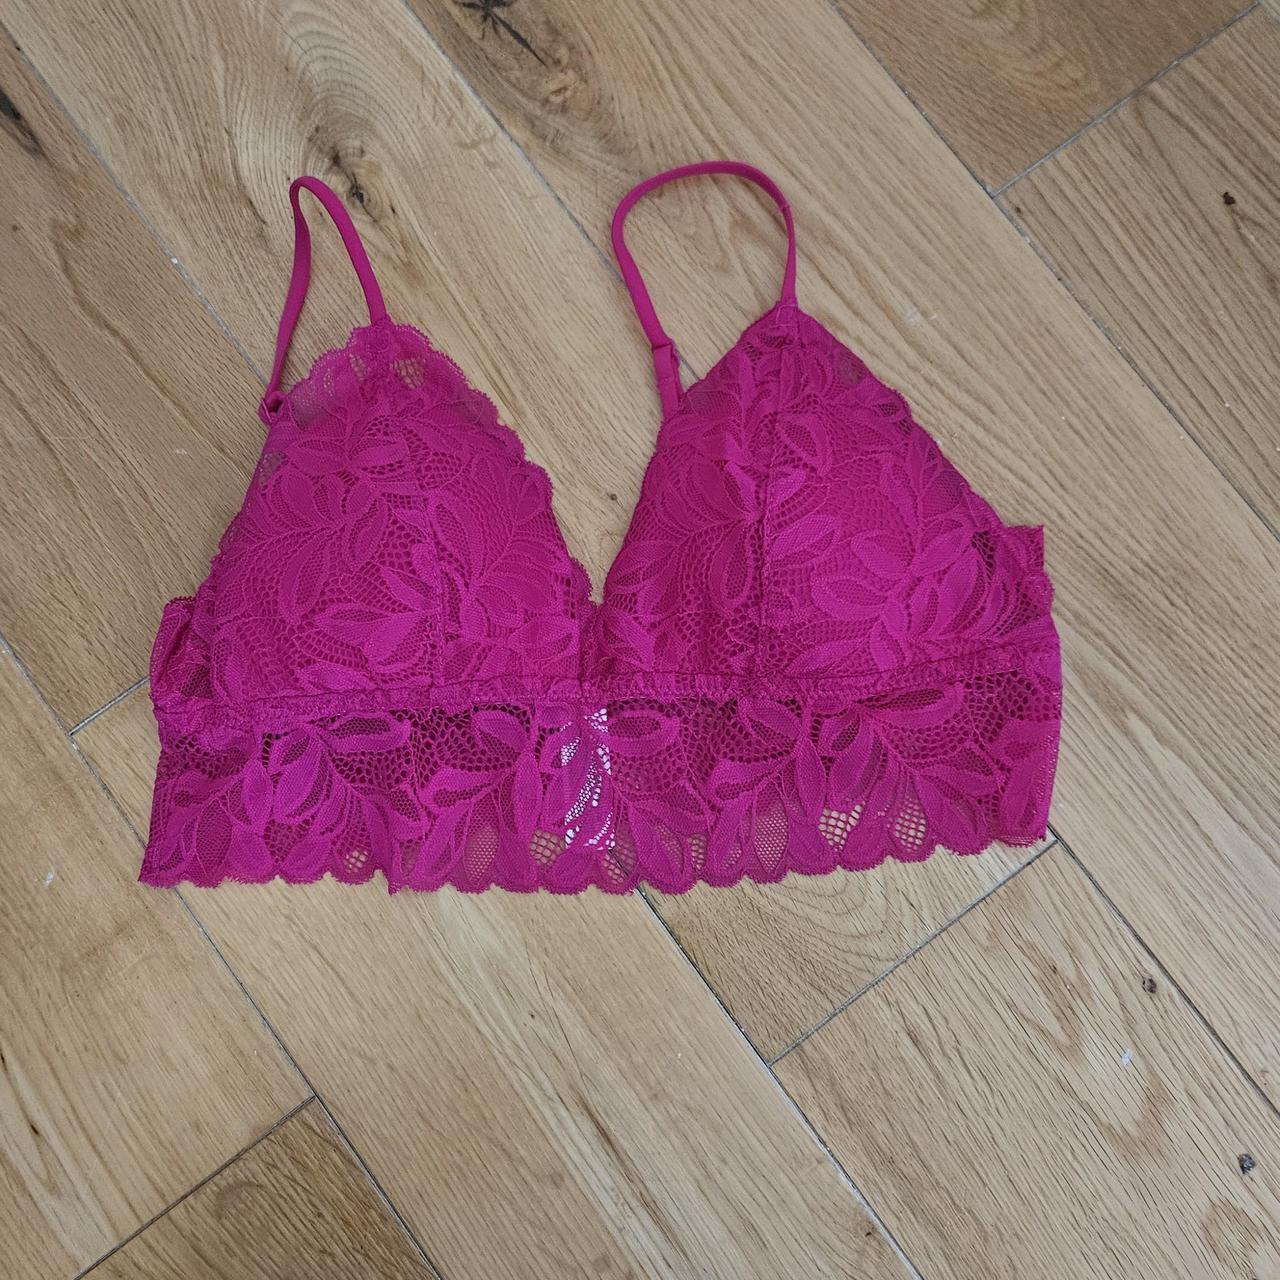 NWT PINK velvet bralette . super cute and able to - Depop